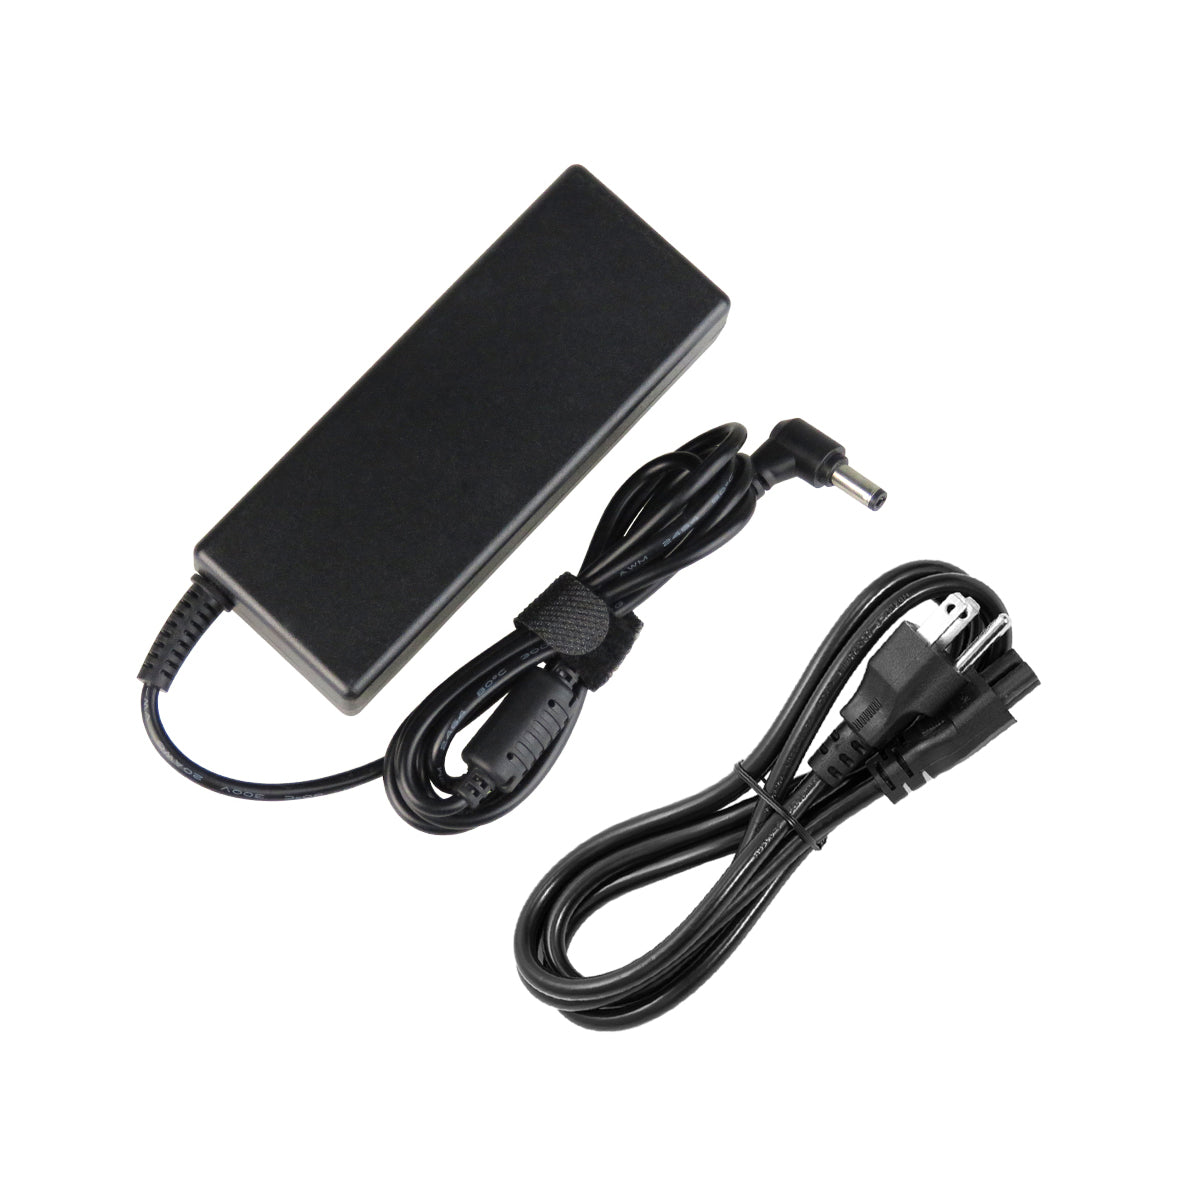 AC Adapter Charger for ASUS A45VM Notebook.